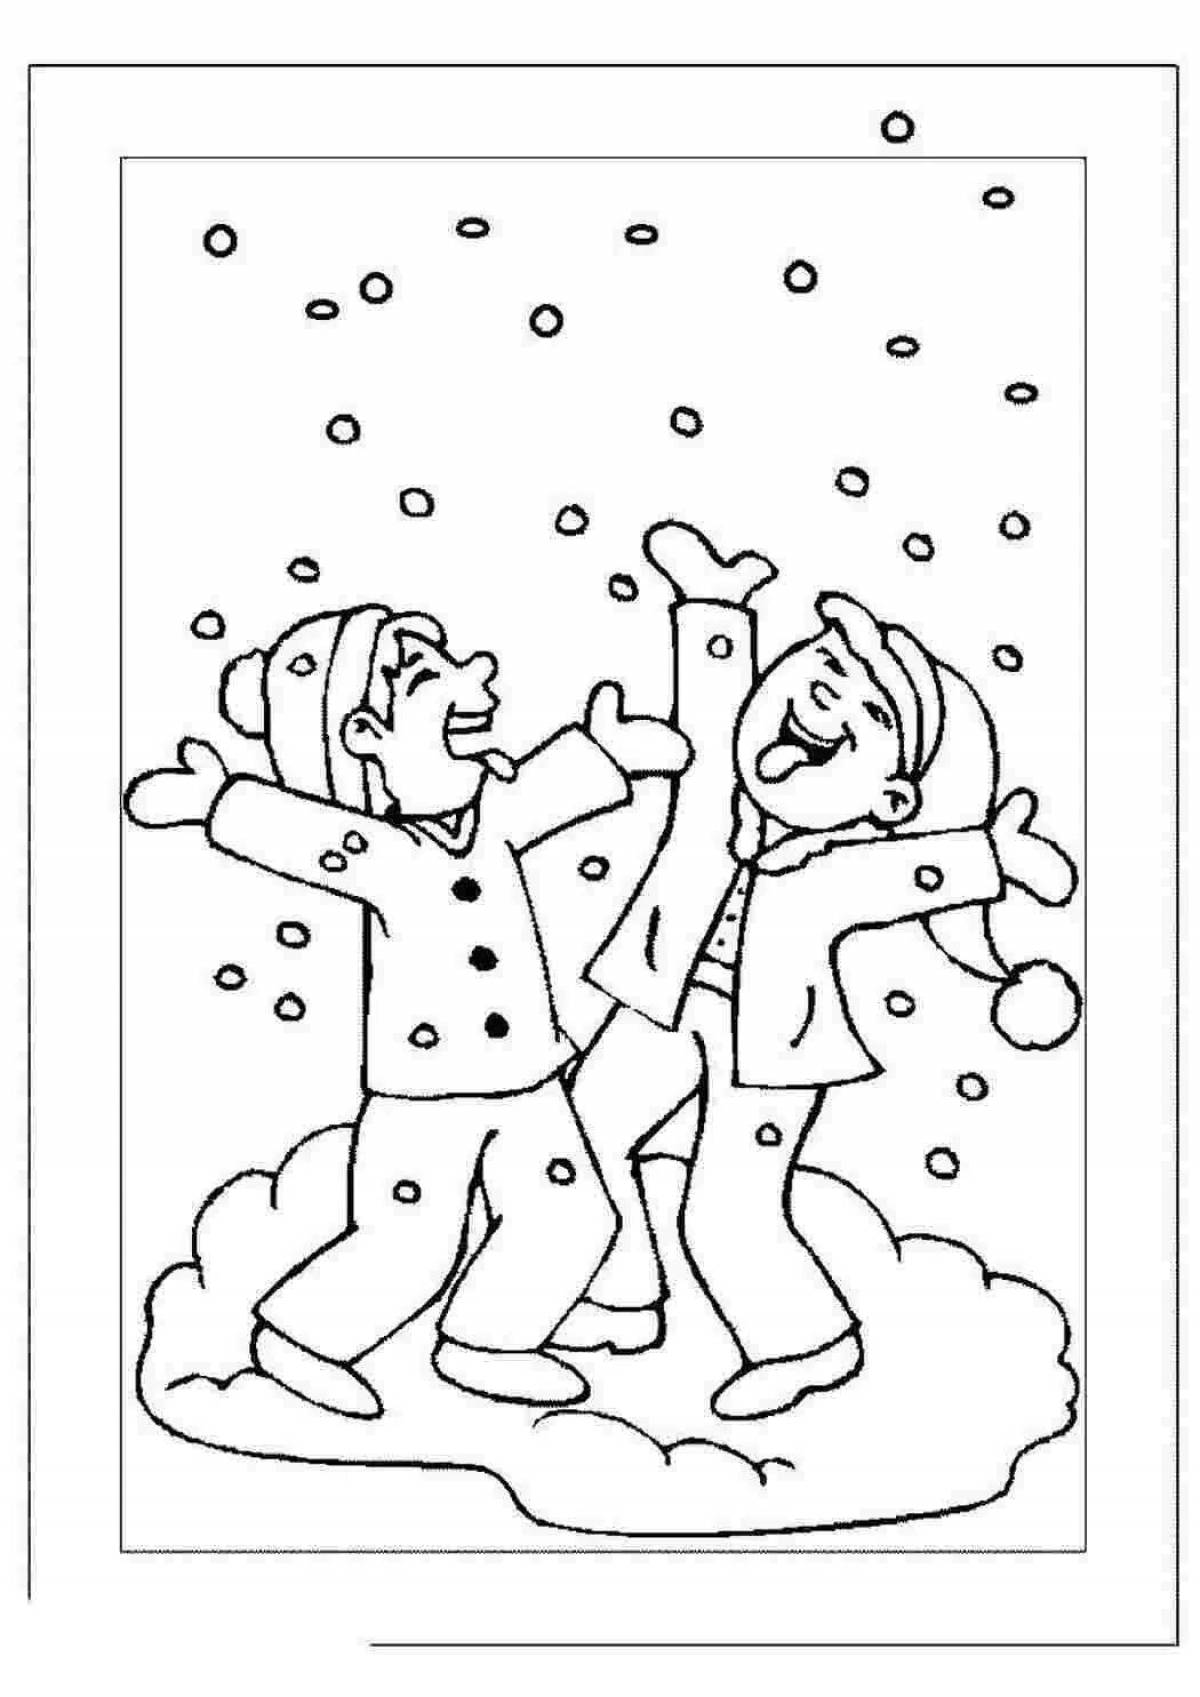 Creative snowball coloring book for kids